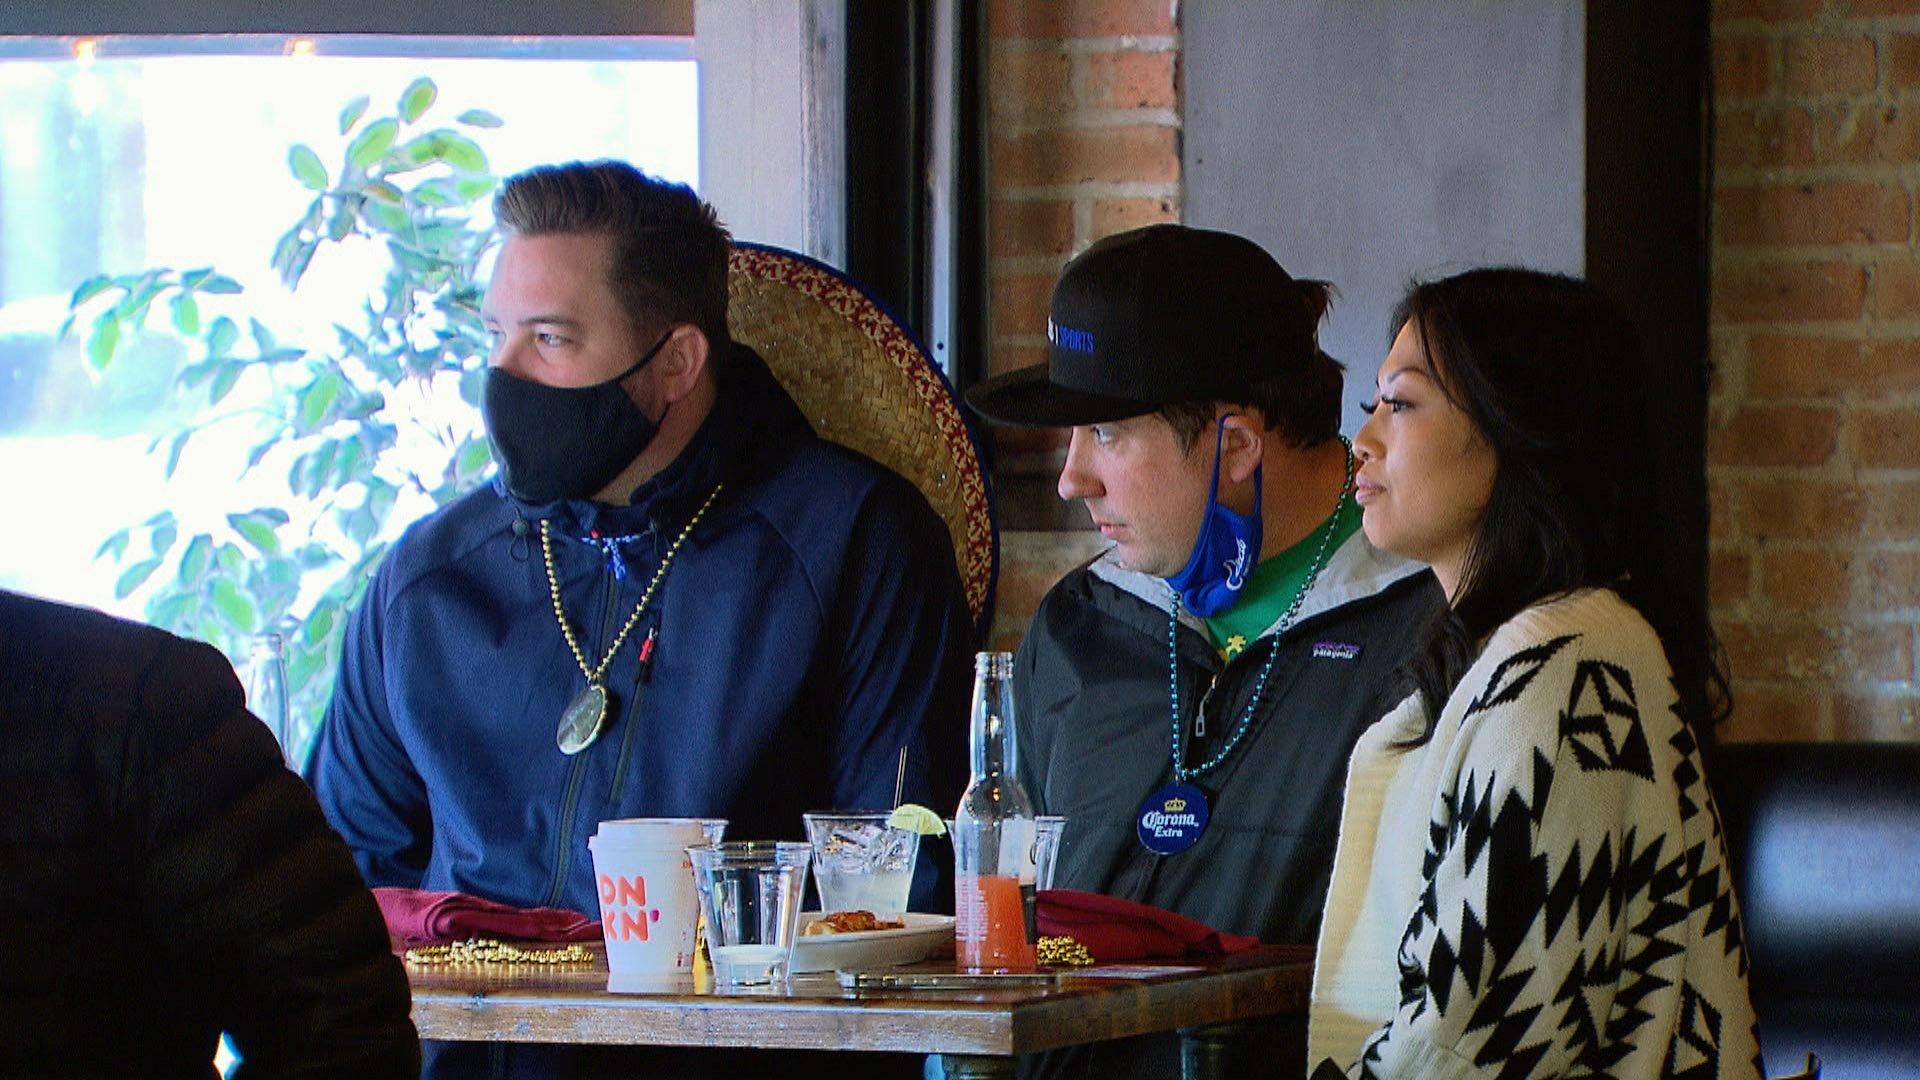 In this file photo, restaurant patrons wear masks while dining indoors. (WTTW News)